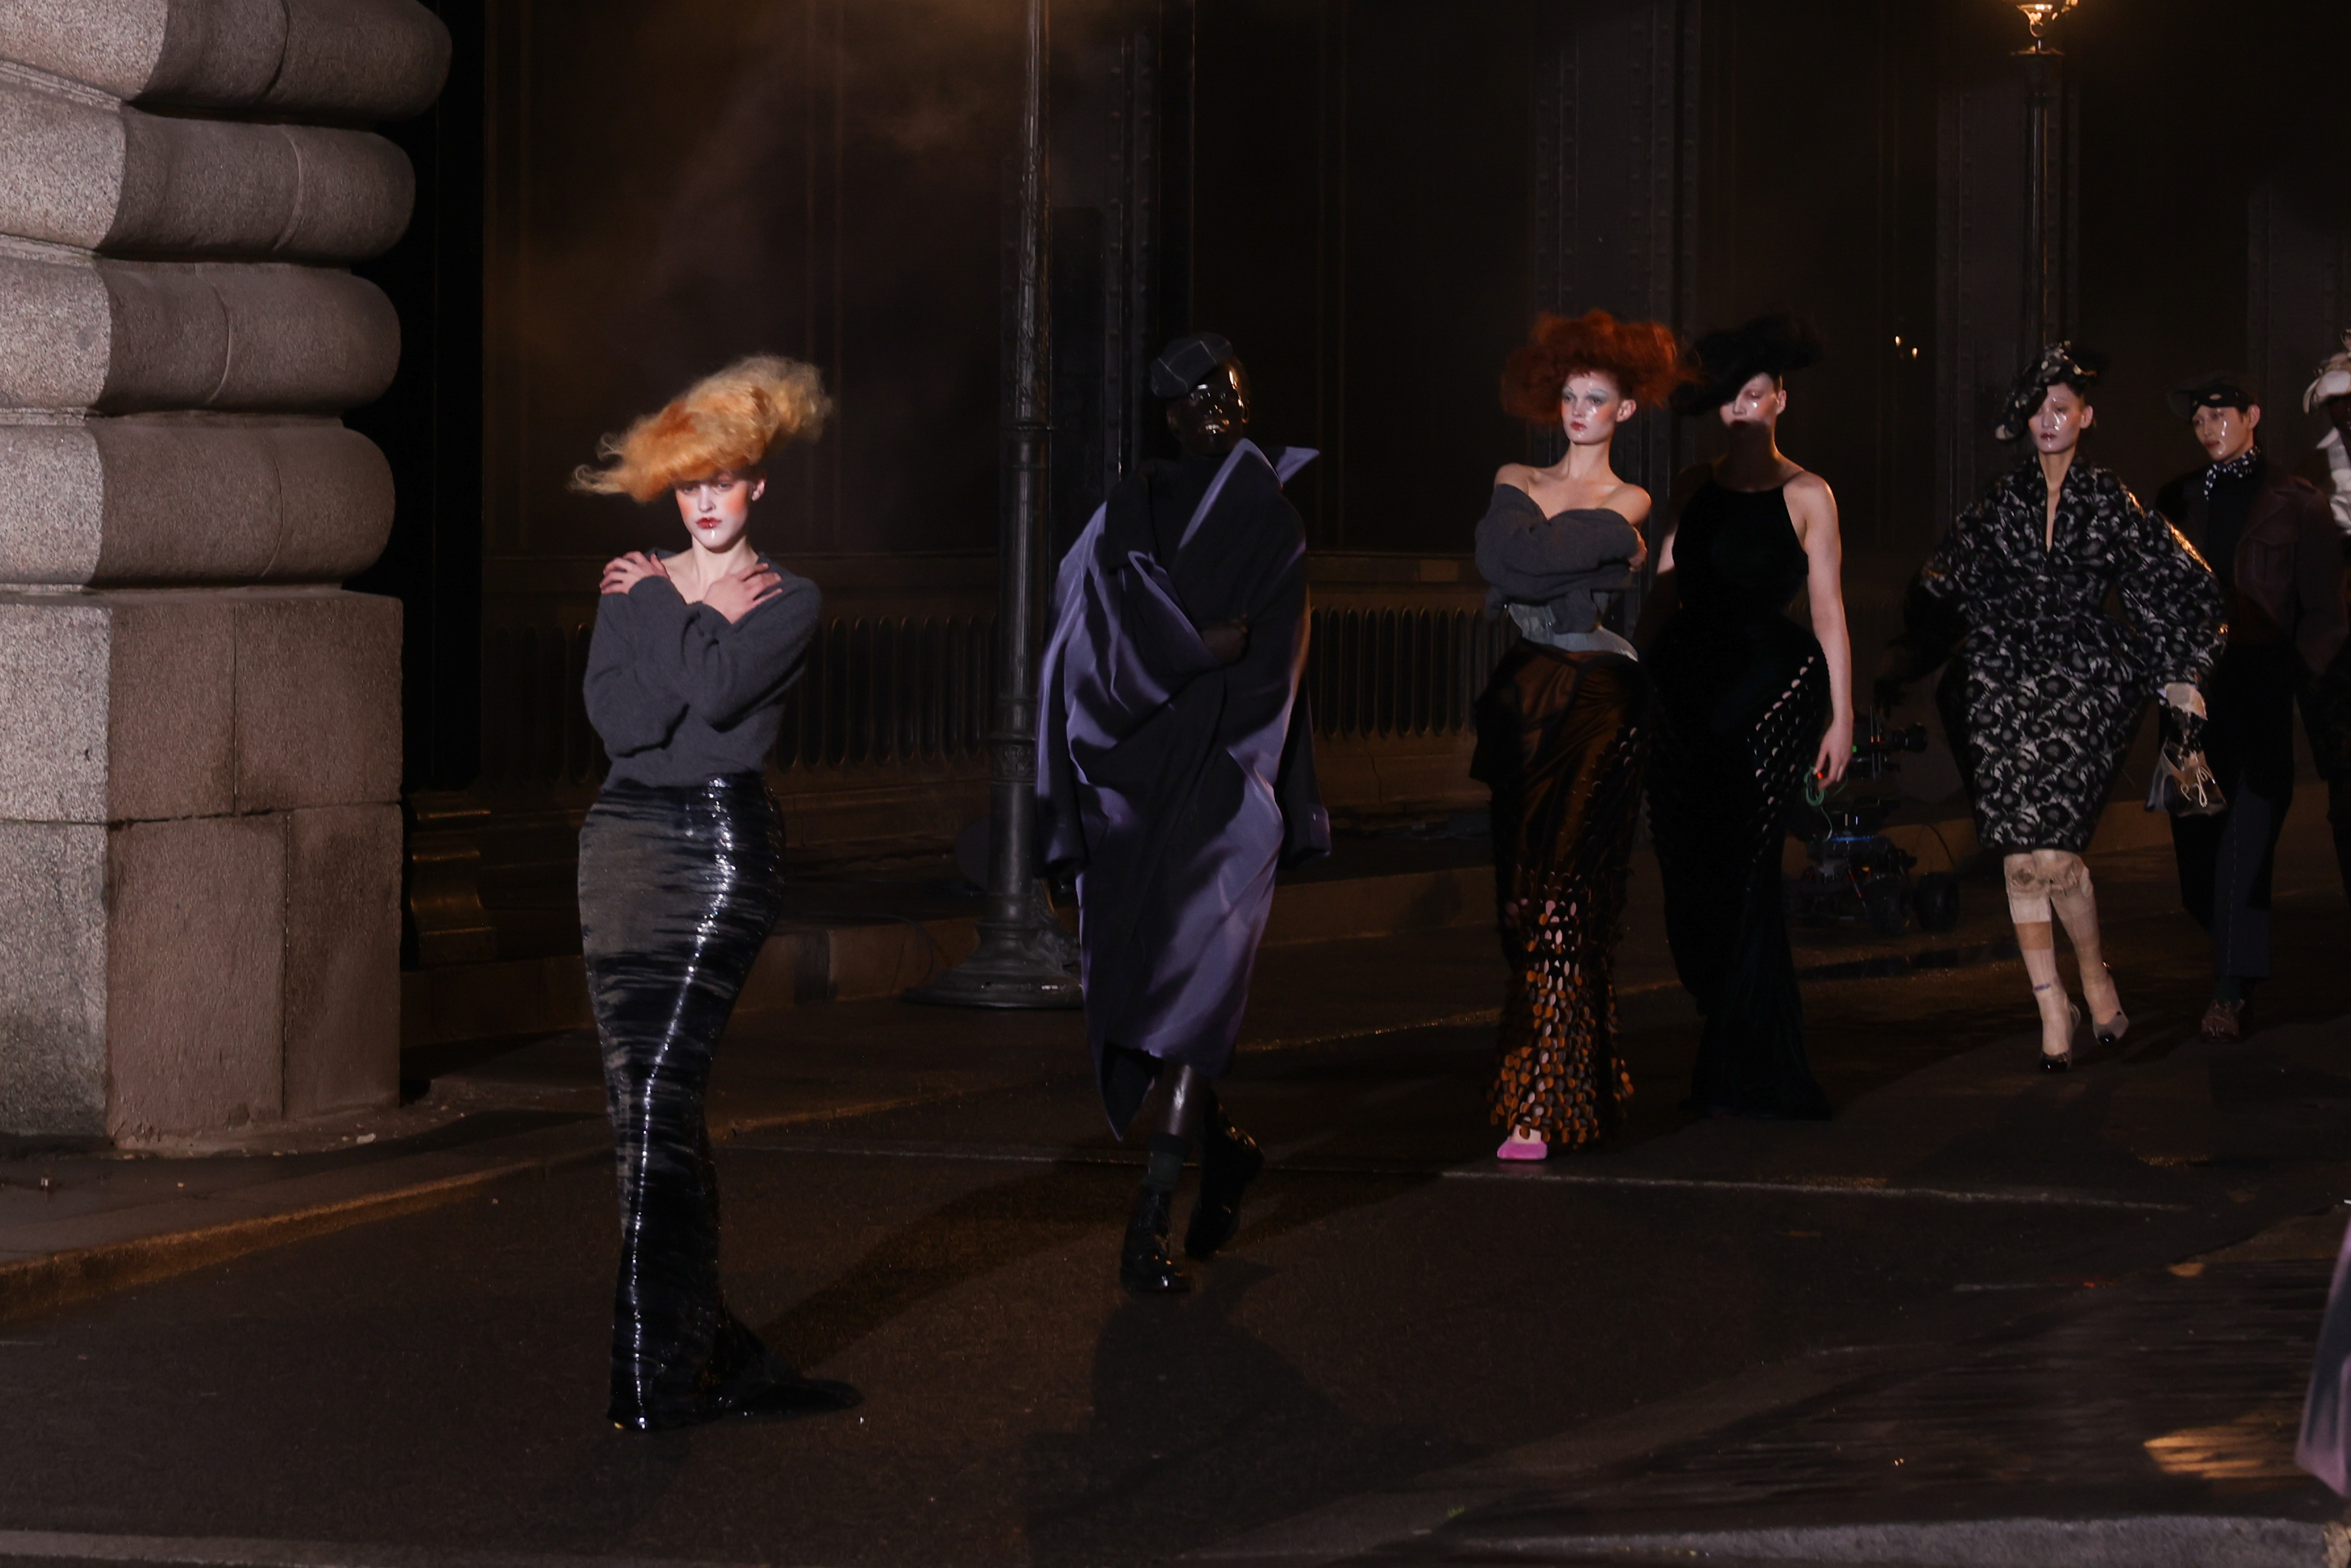 Fashion models showcasing eclectic hairstyles and unique outfits during a night event